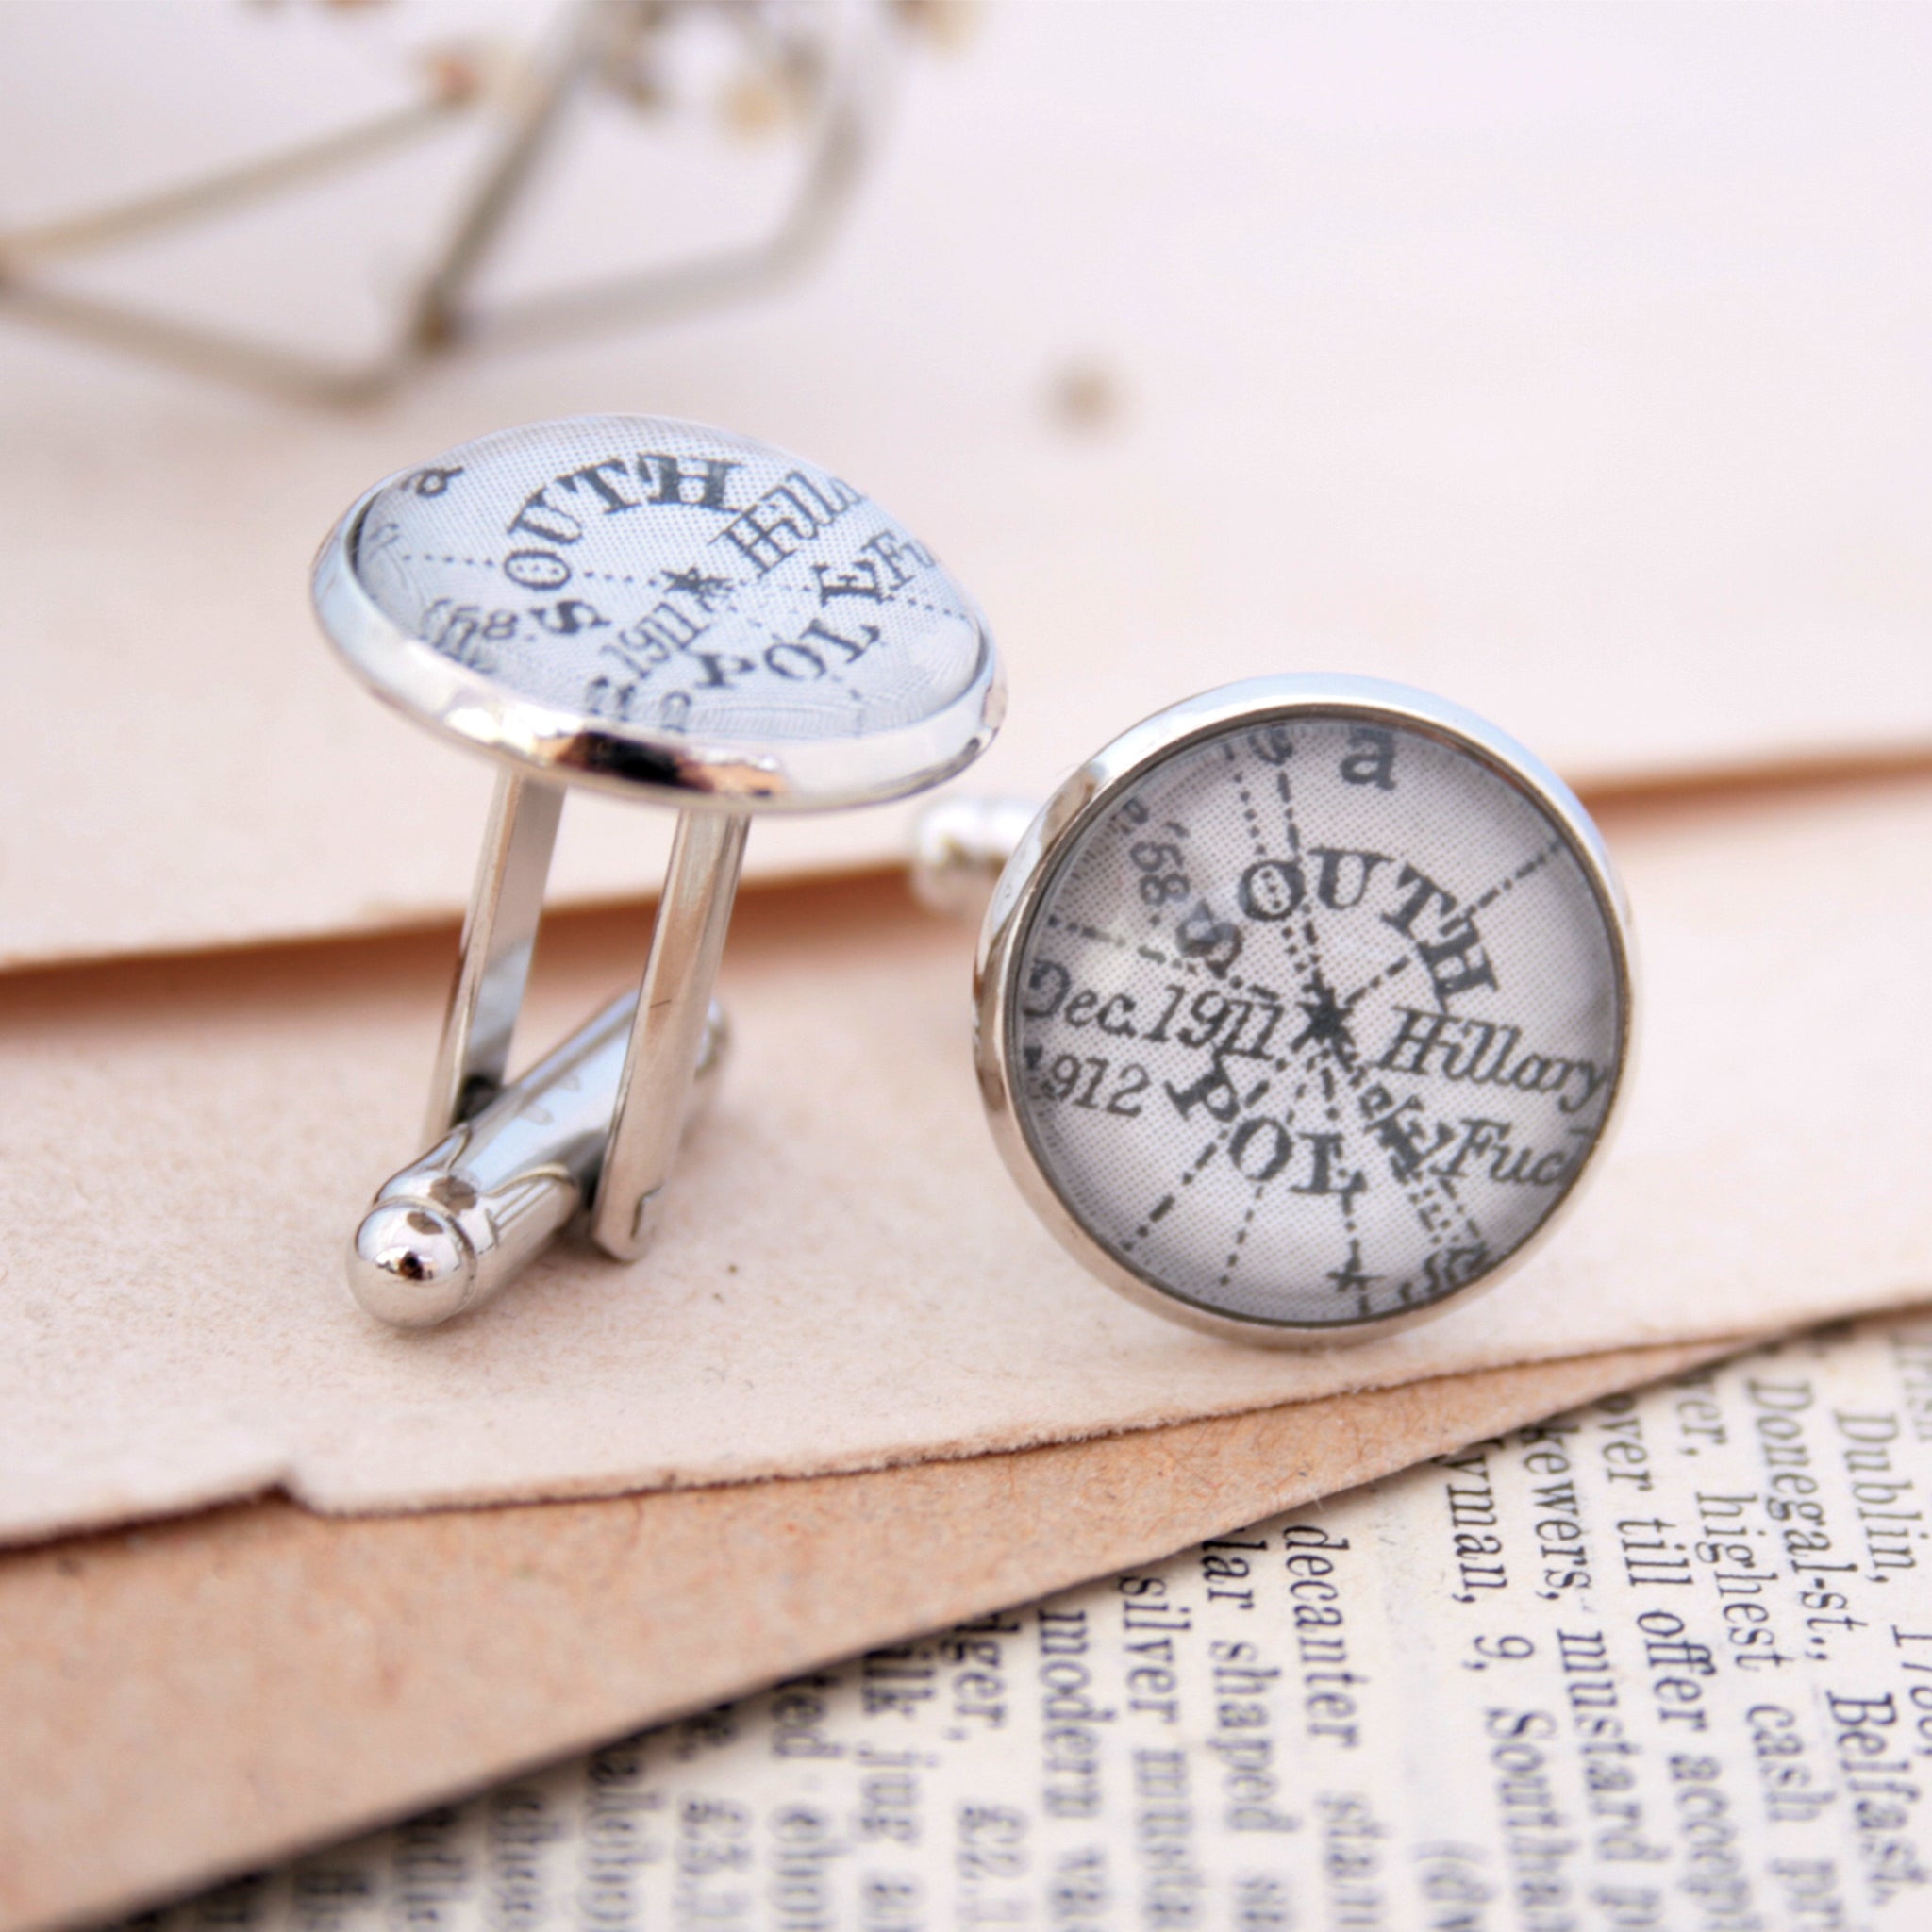 Personalised map cufflinks in silver tone featuring maps of South Pole